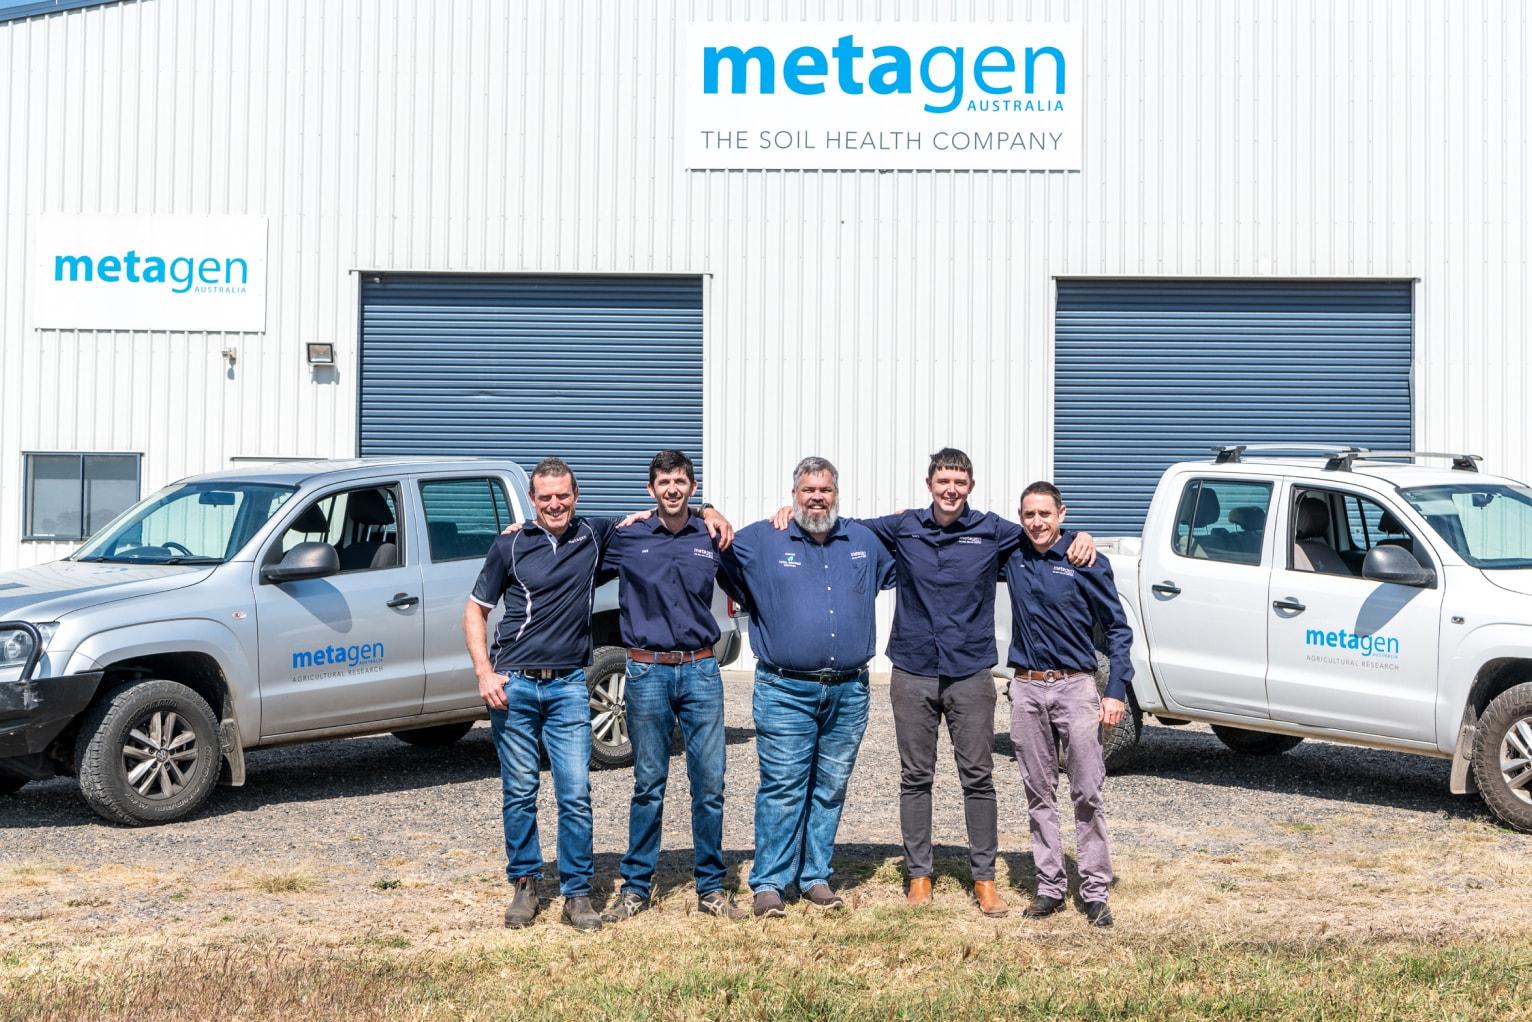 the team at Metagen posing outside of a large garage building with a sign that says 'Metagen'